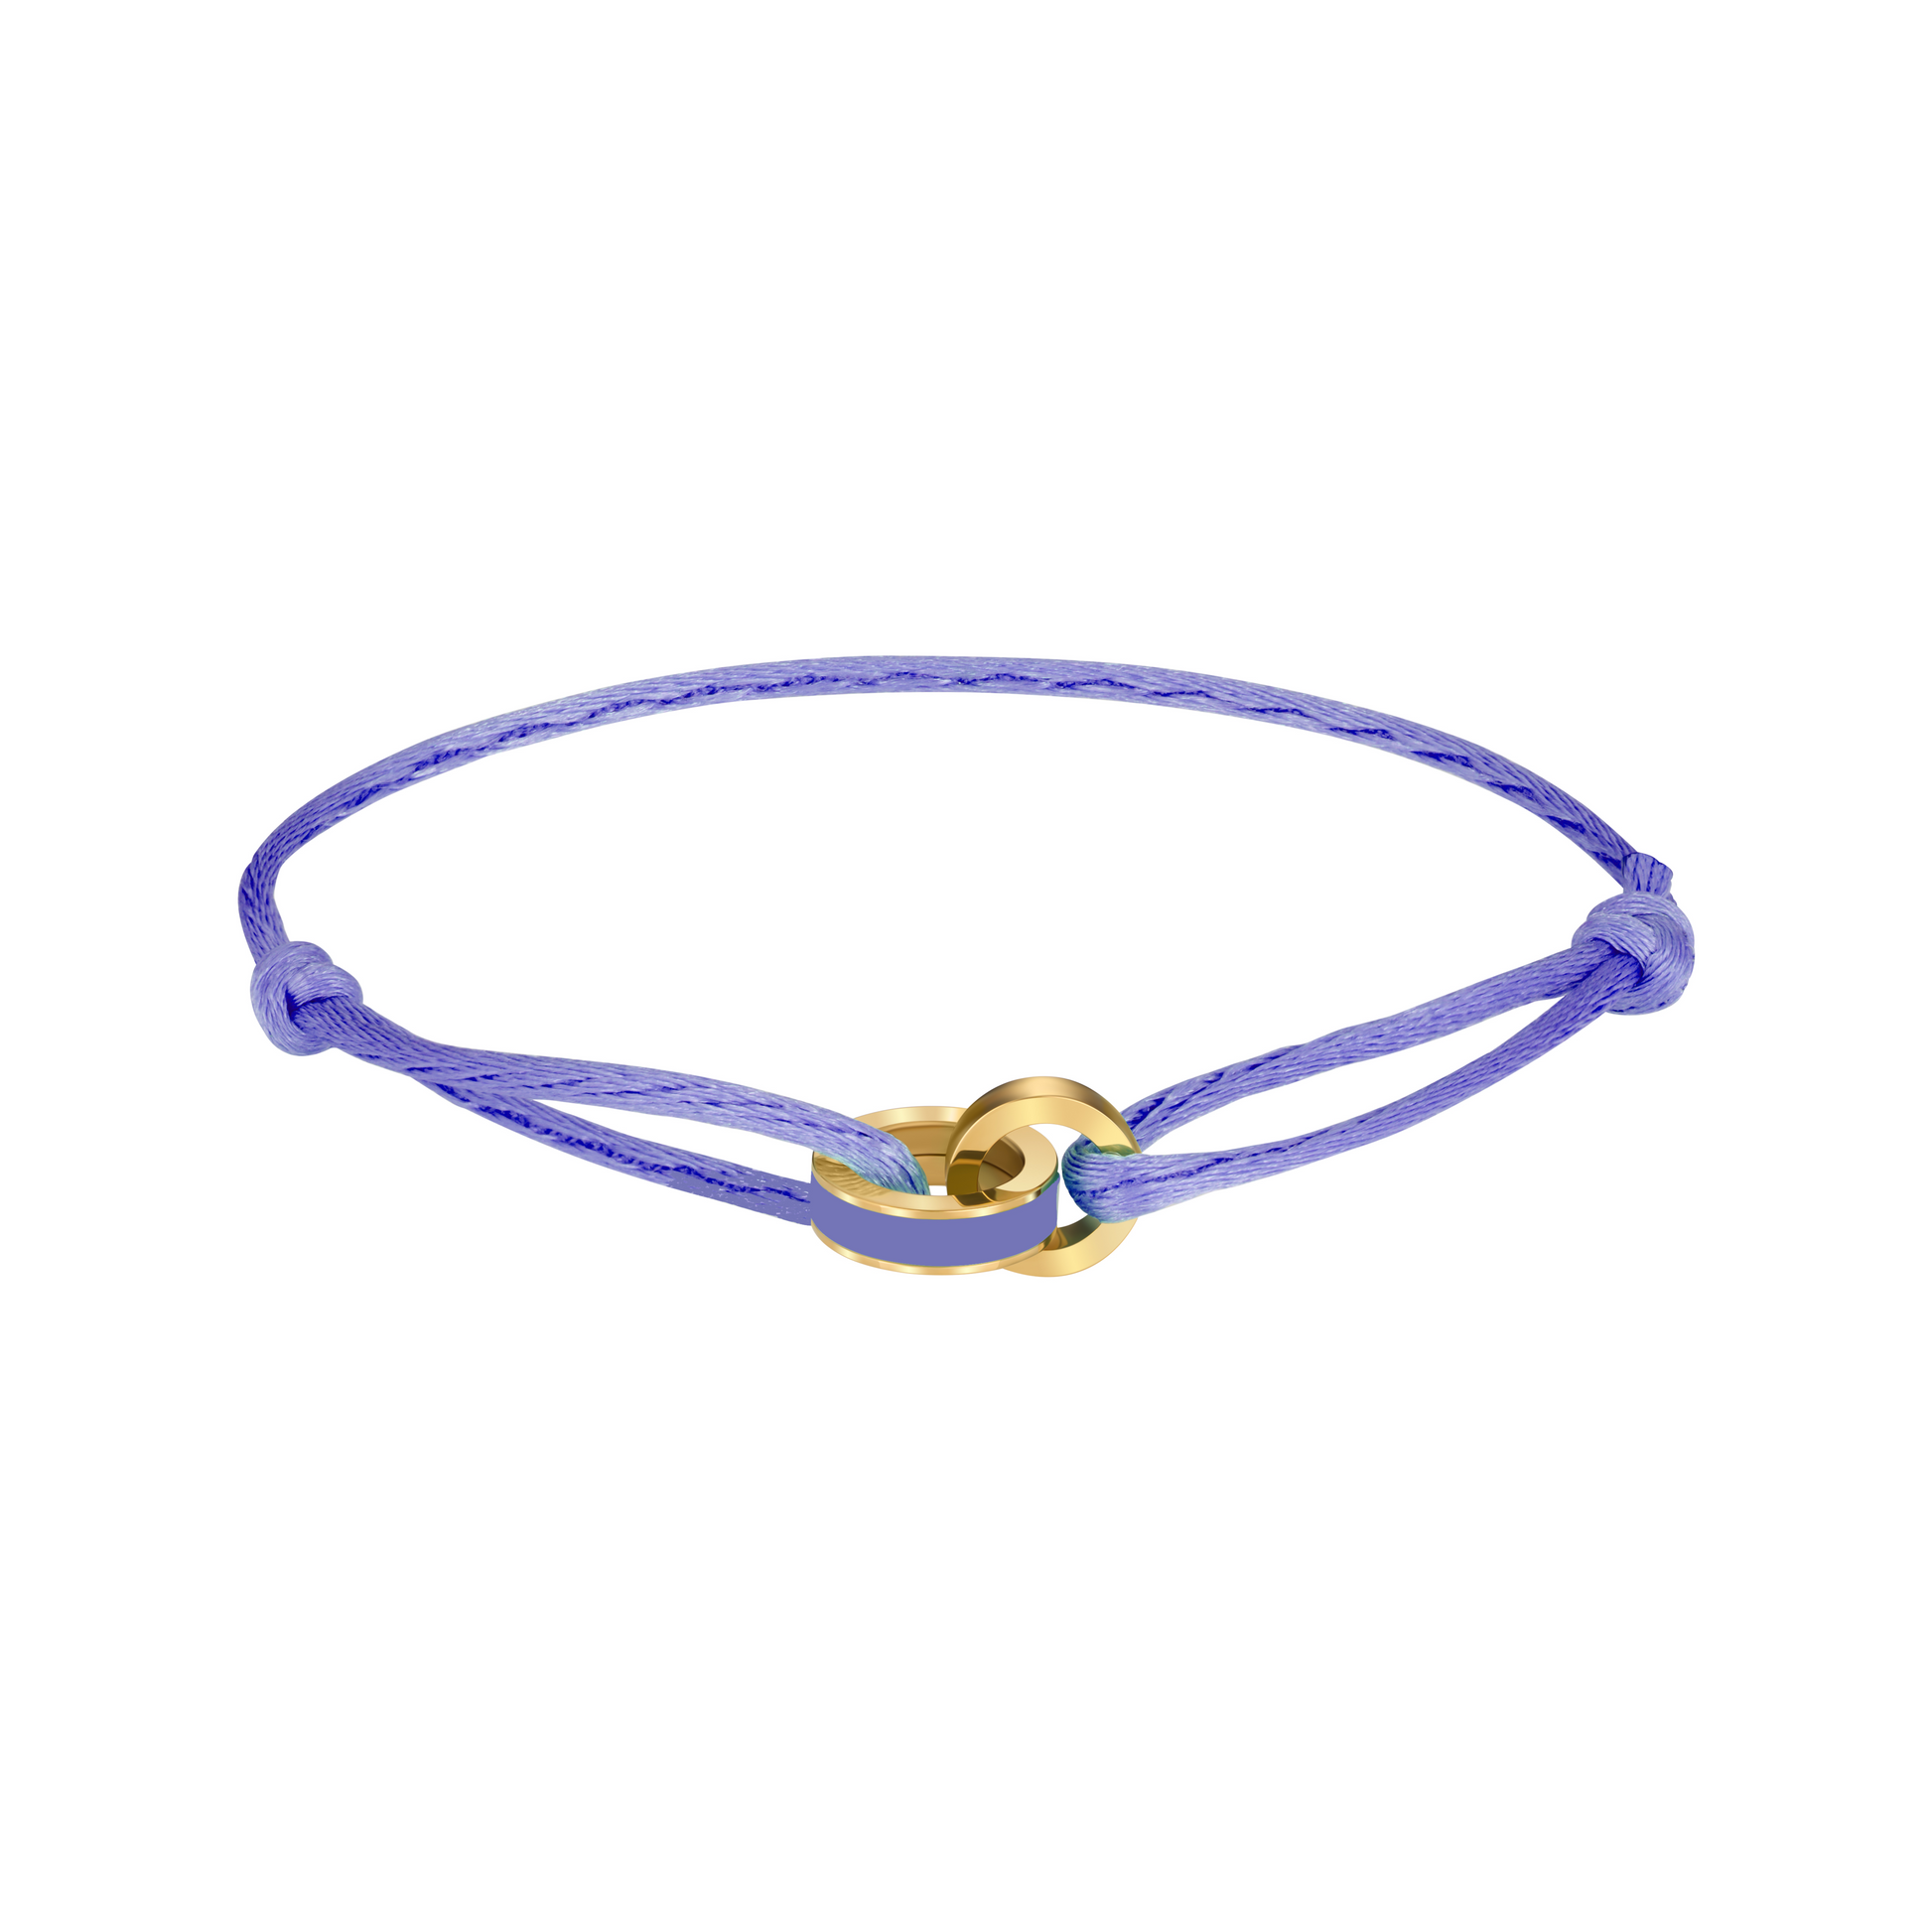 WEWA PERSIAN BLUE CORD AND CHIP BRACELET